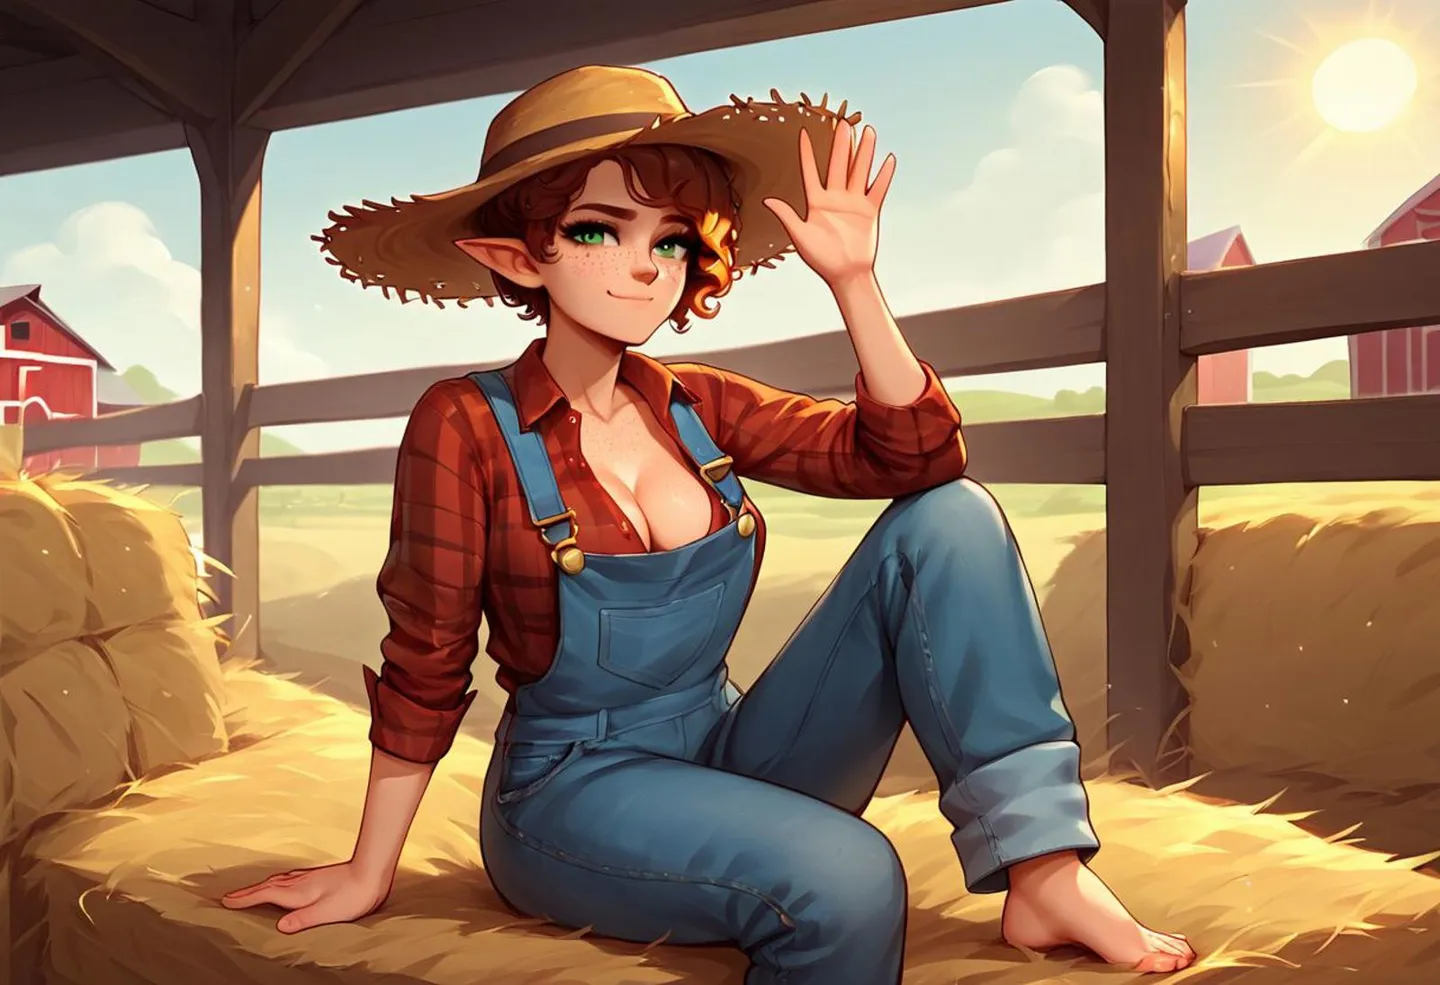 Anime-style farm girl wearing a straw hat and overalls, sitting on hay and waving. AI-generated image using Stable Diffusion.